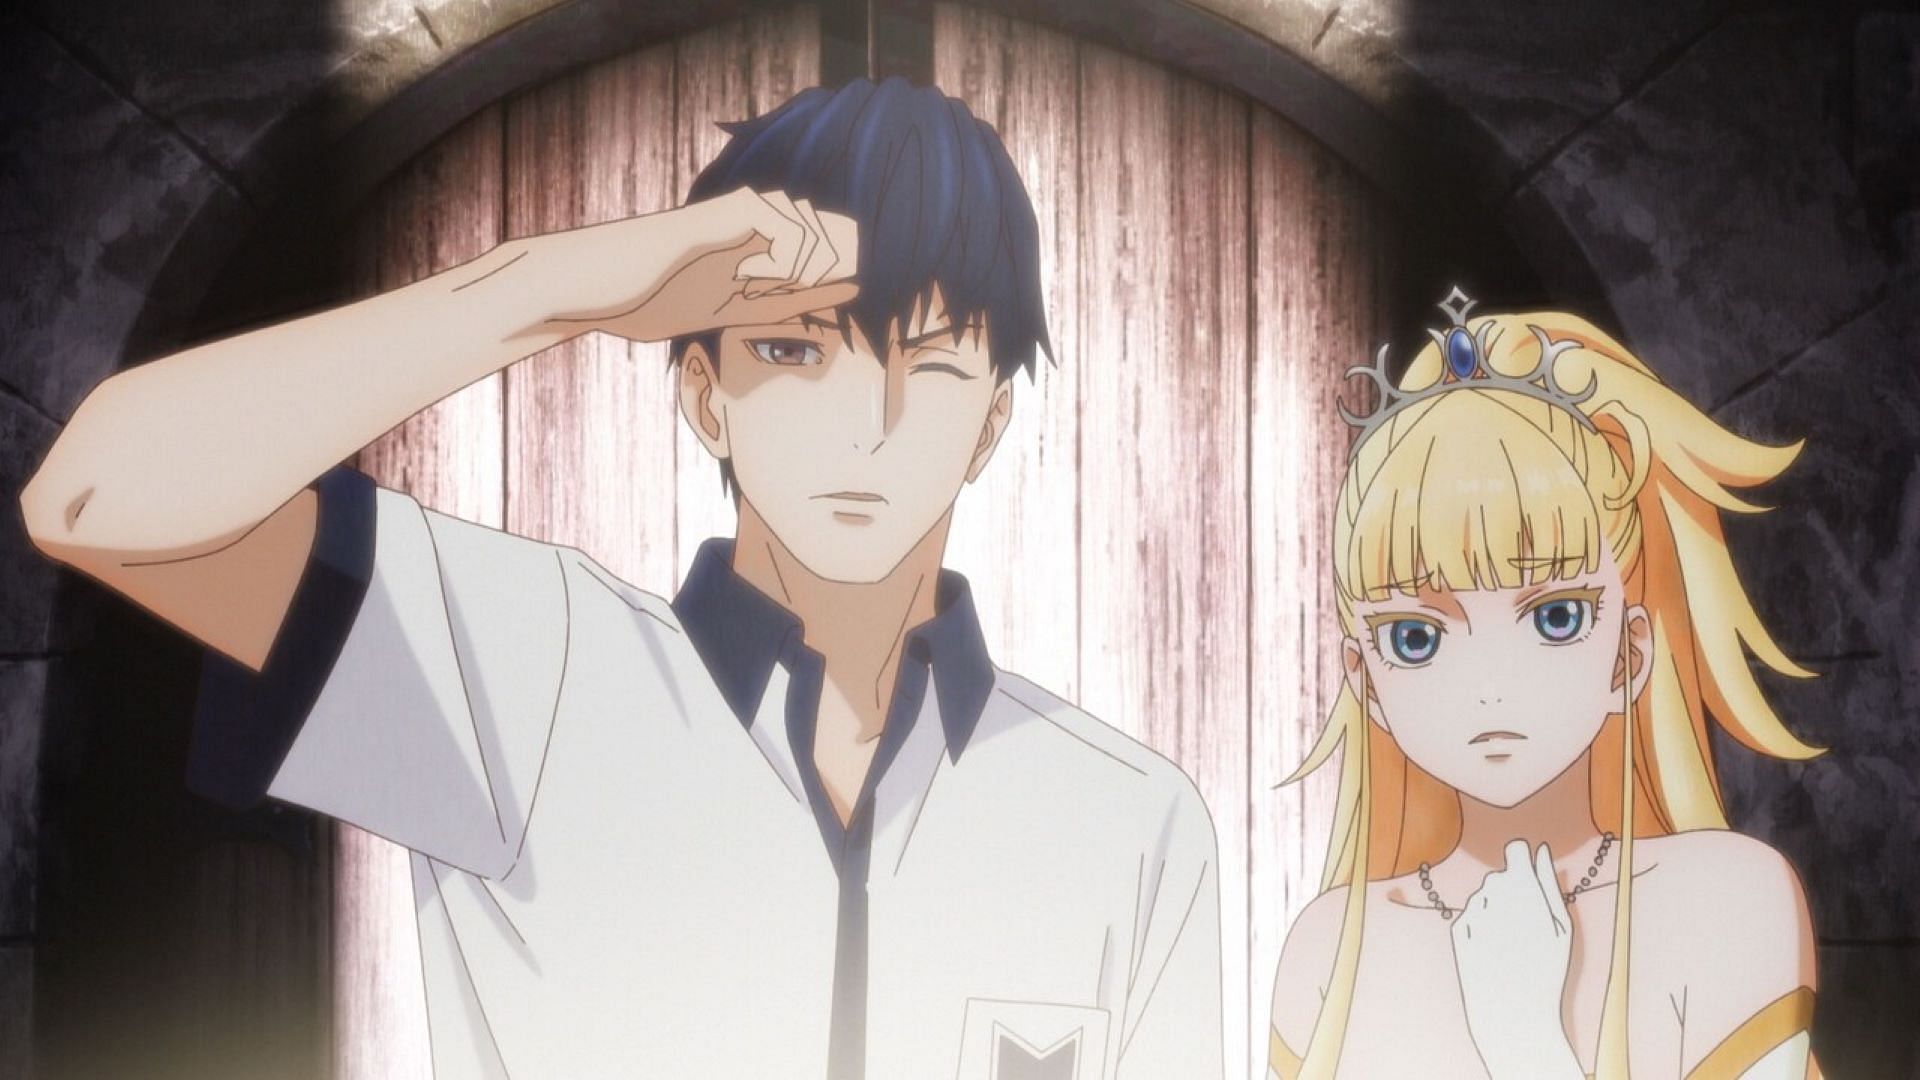 Protagonist Sato and the love of his life, Hime. (Image via Staple Entertainment)